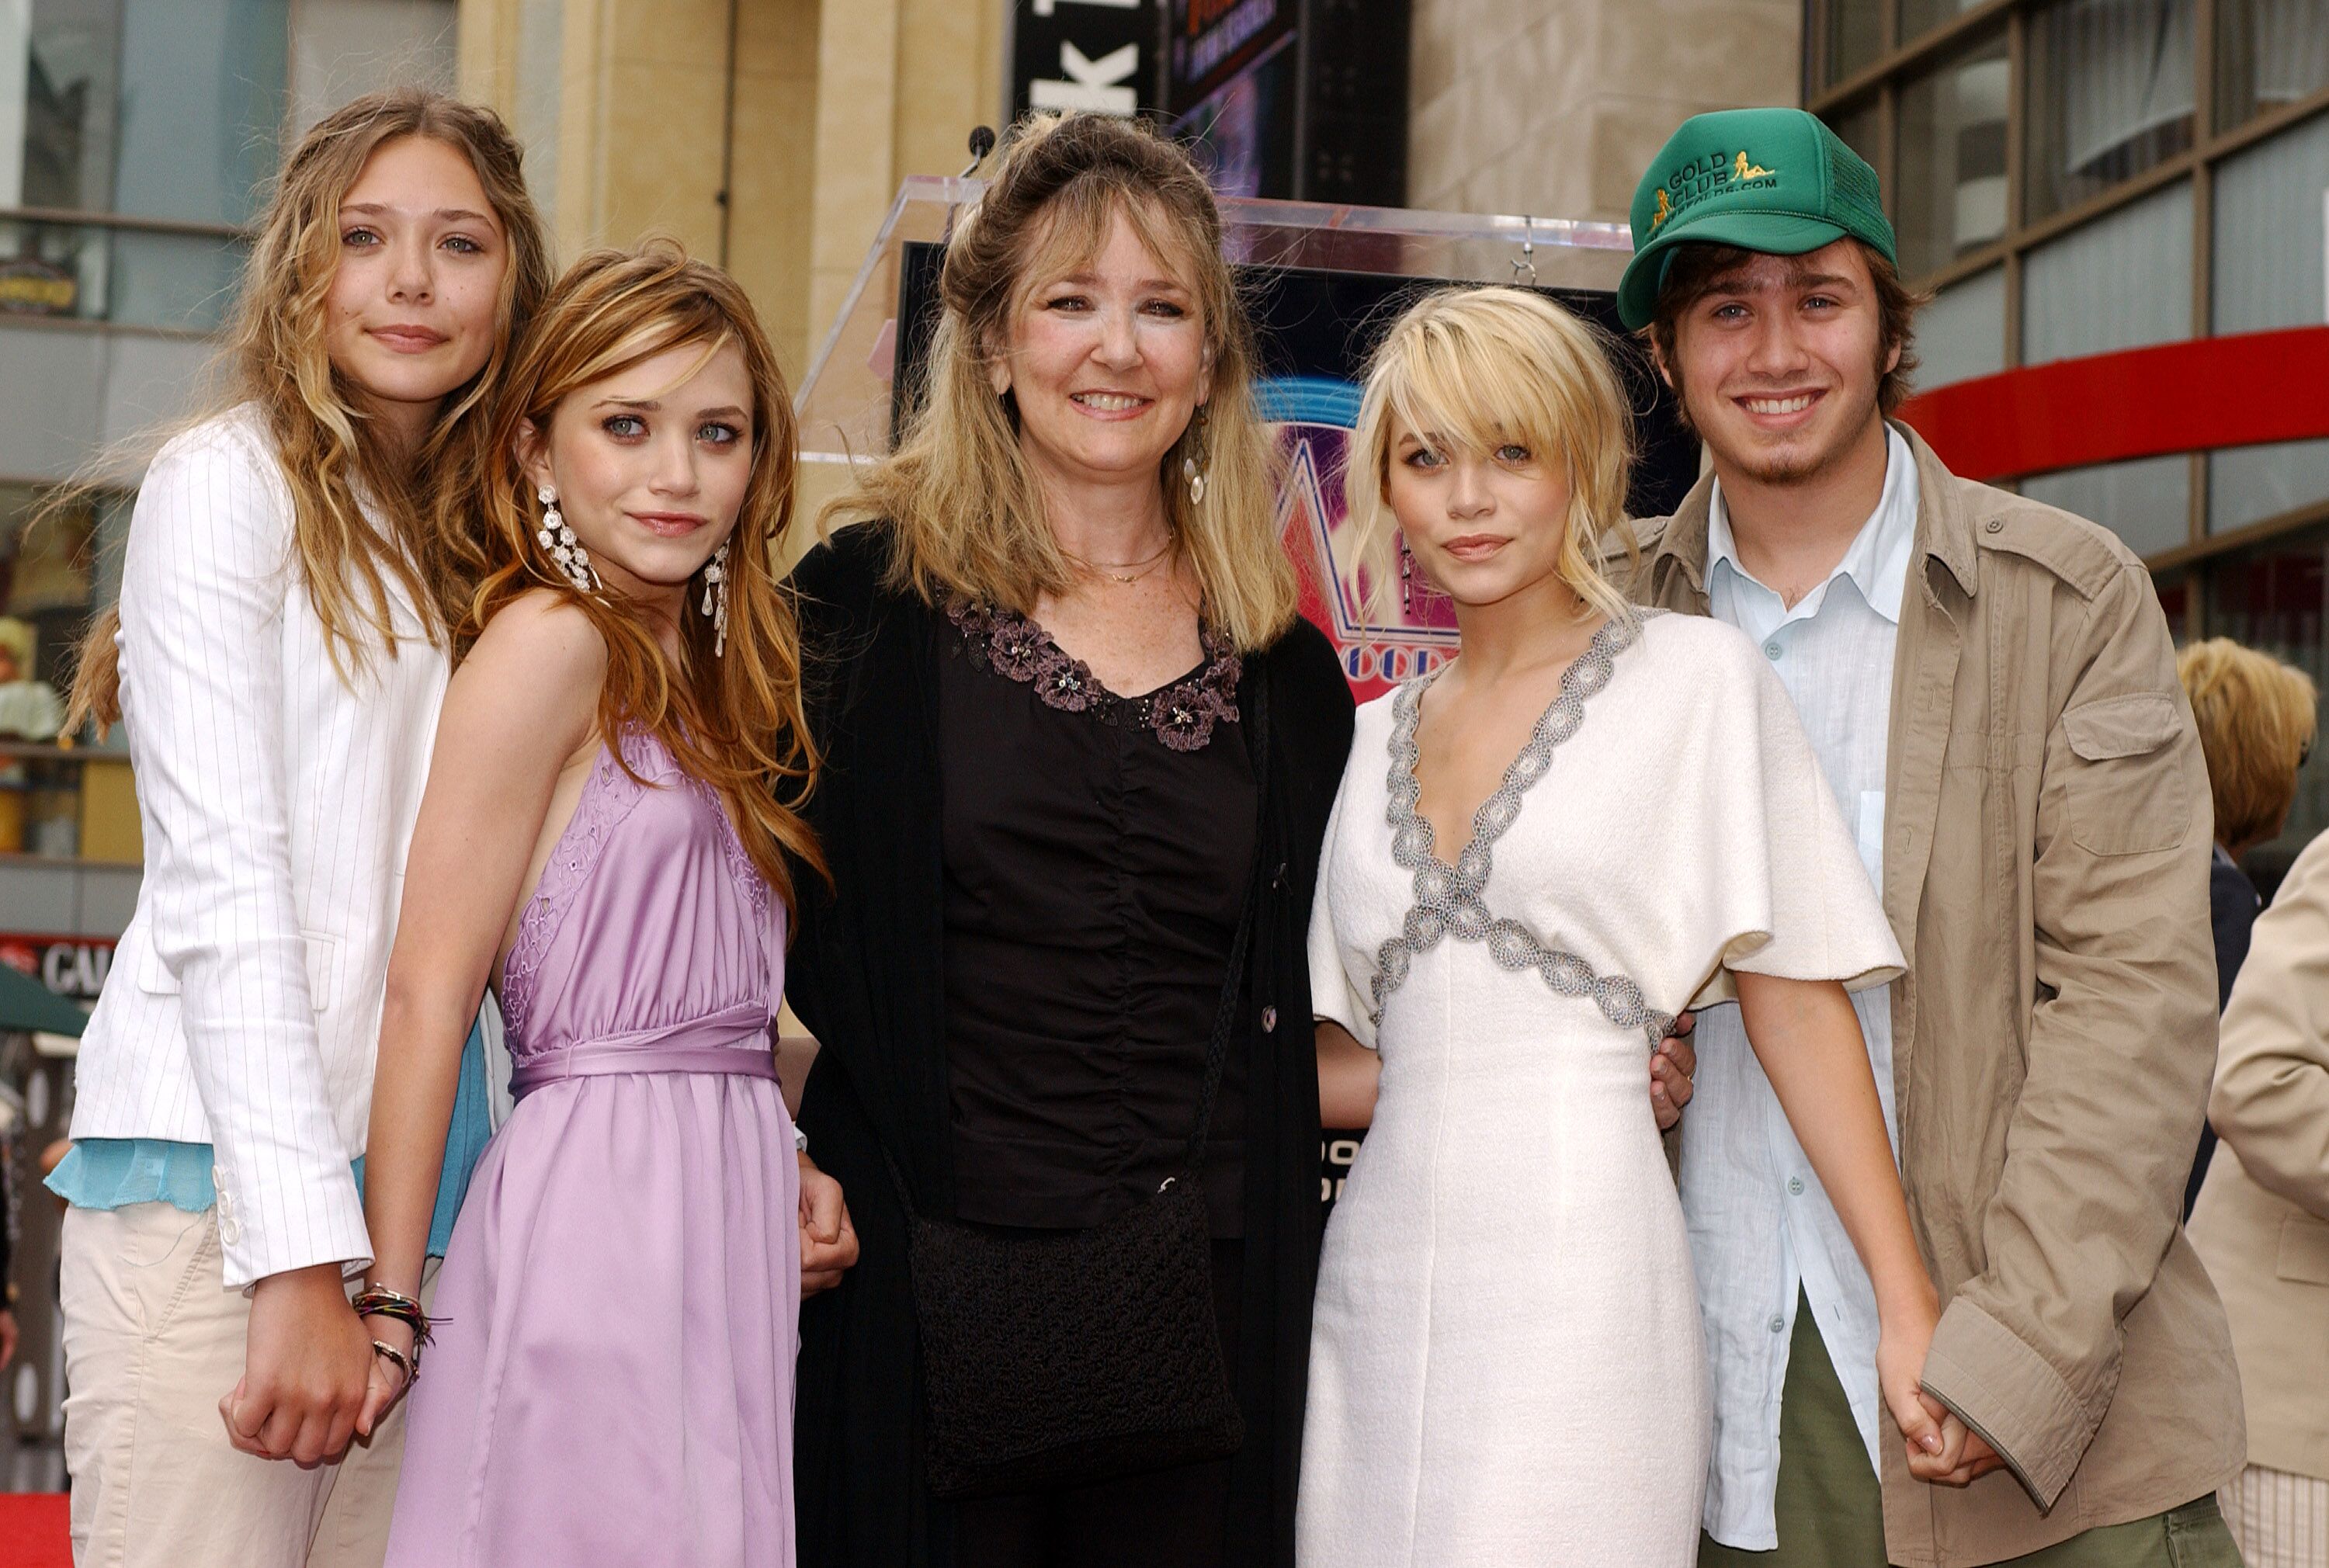  Elizabeth, Mary-Kate, Jarnette, Ashley and Trent Olsen during the ceremony honoring Ashley and Mary-Kate with a star on the Hollywood Walk of Fame in 2004. | Source: Getty Images